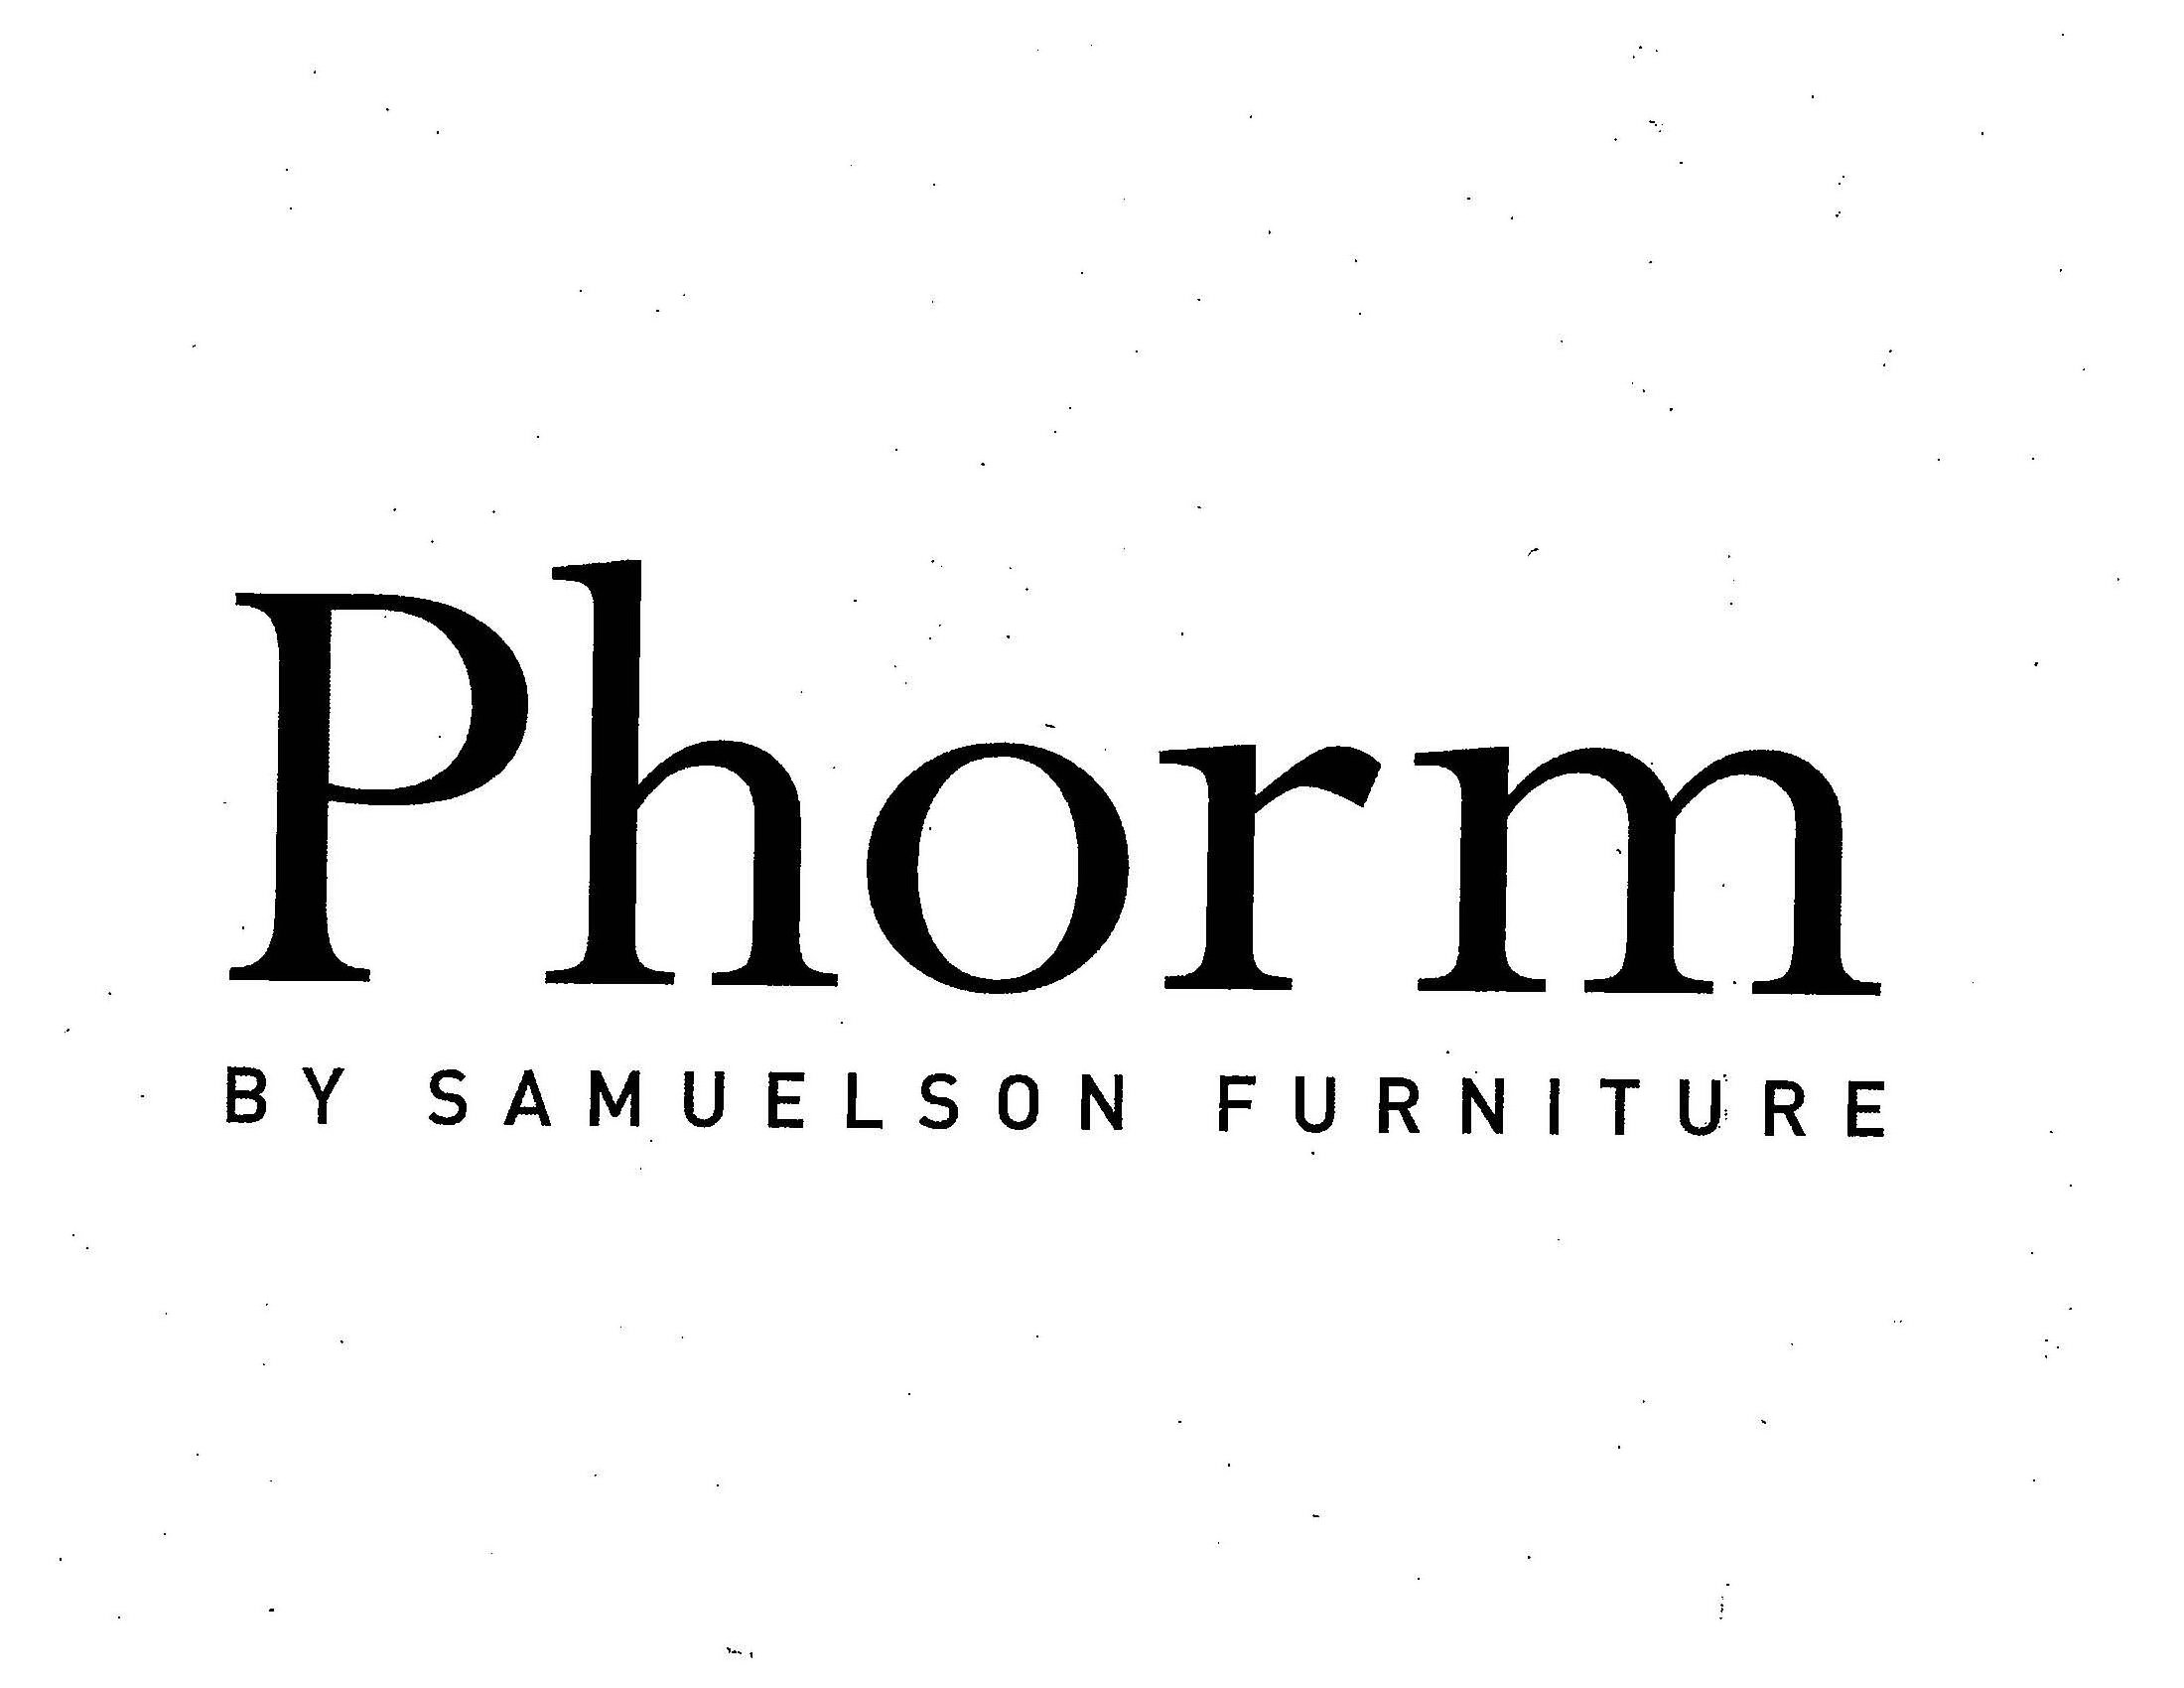  PHORM BY SAMUELSON FURNITURE